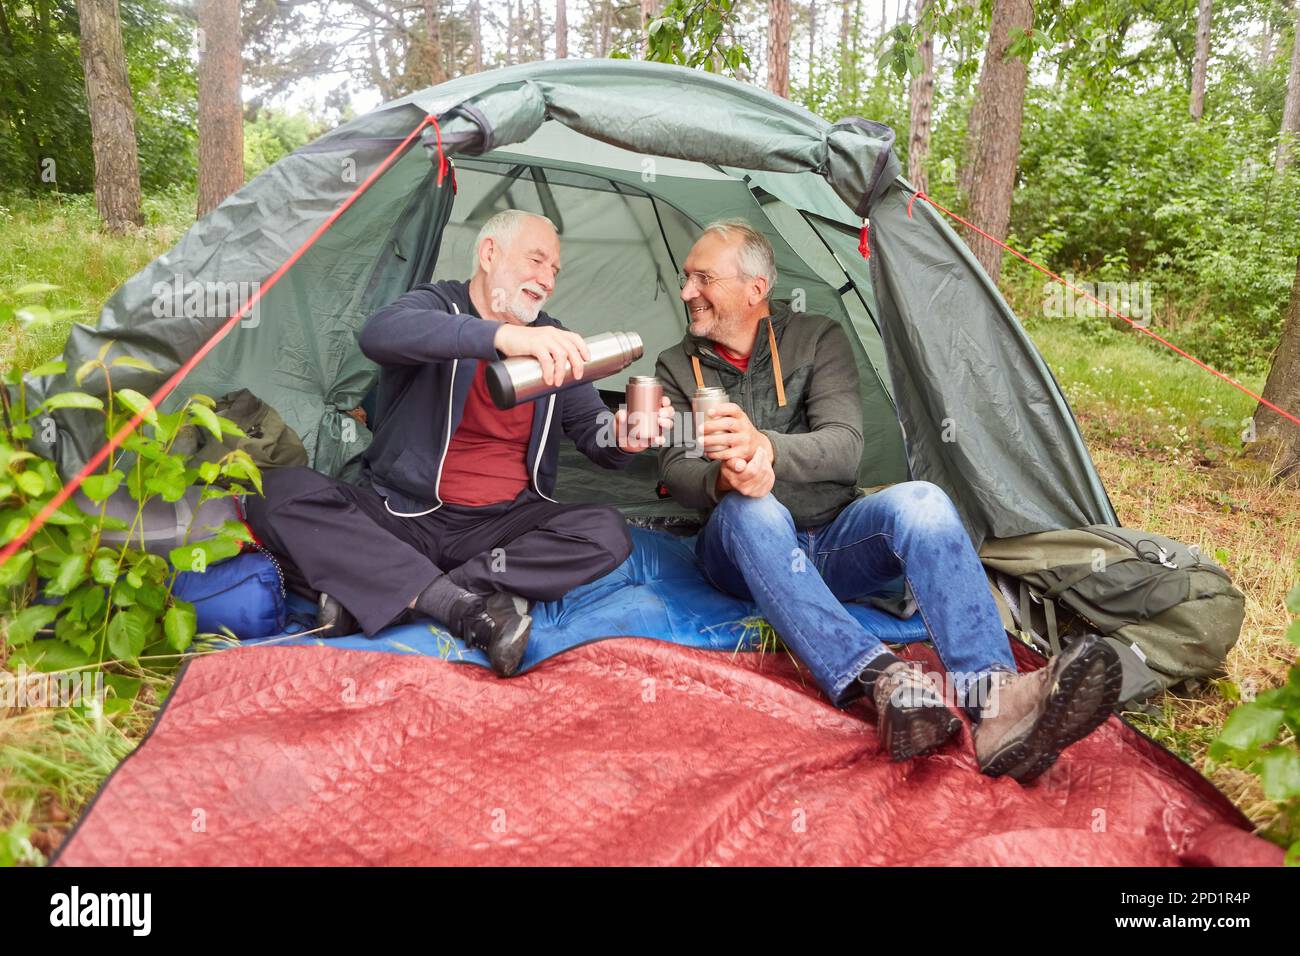 Smiling elderly man pouring tea by male friend in camping tent during vacation at forest Stock Photo